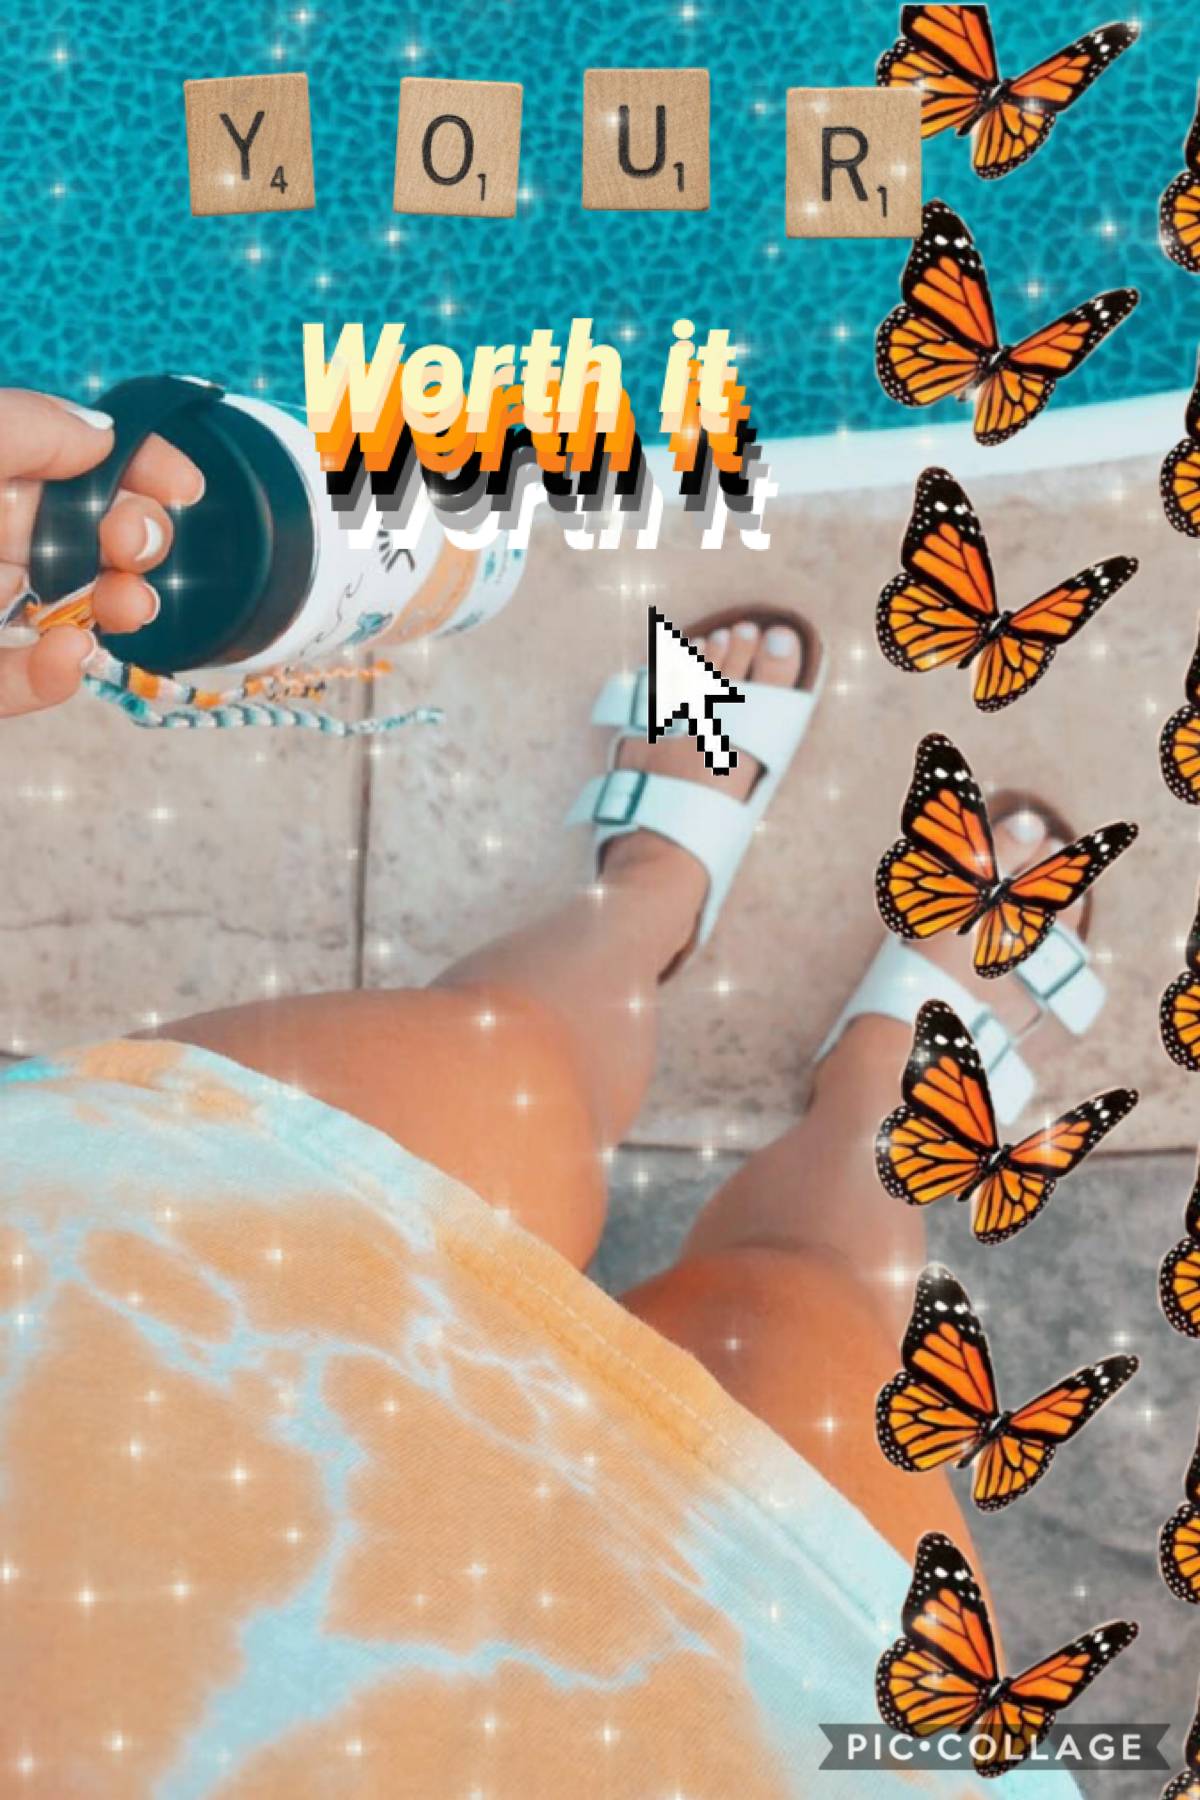 Your worth it ((tap))

[4•24•20]

Qotd: fav music artist 
Aotd: Lewis Capaldi he is so good I also love Justin Beiber and Harry Styles